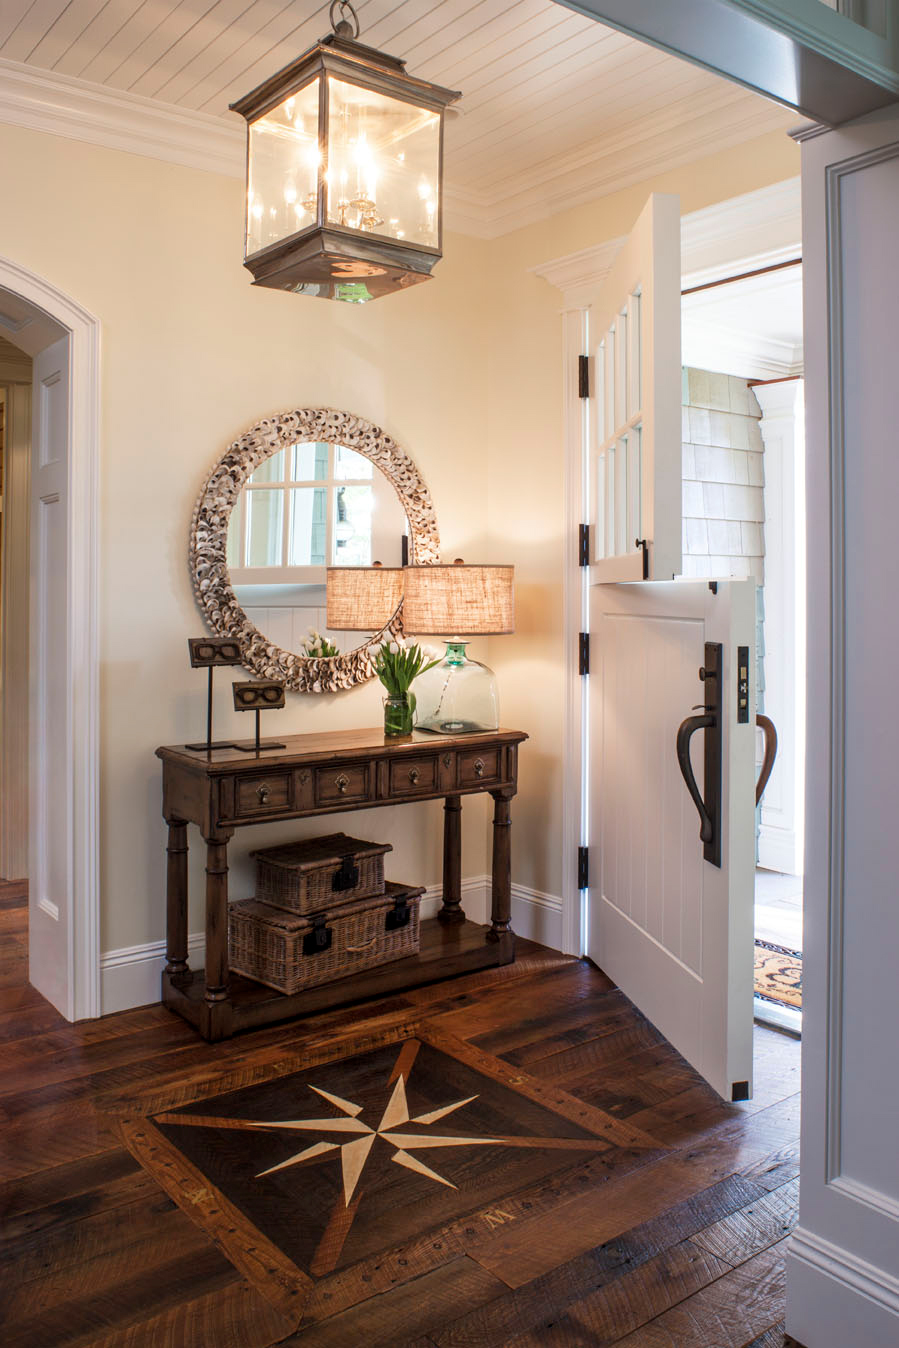 Maximize-on-space-and-place-the-decor-elements-behind-the-front-door